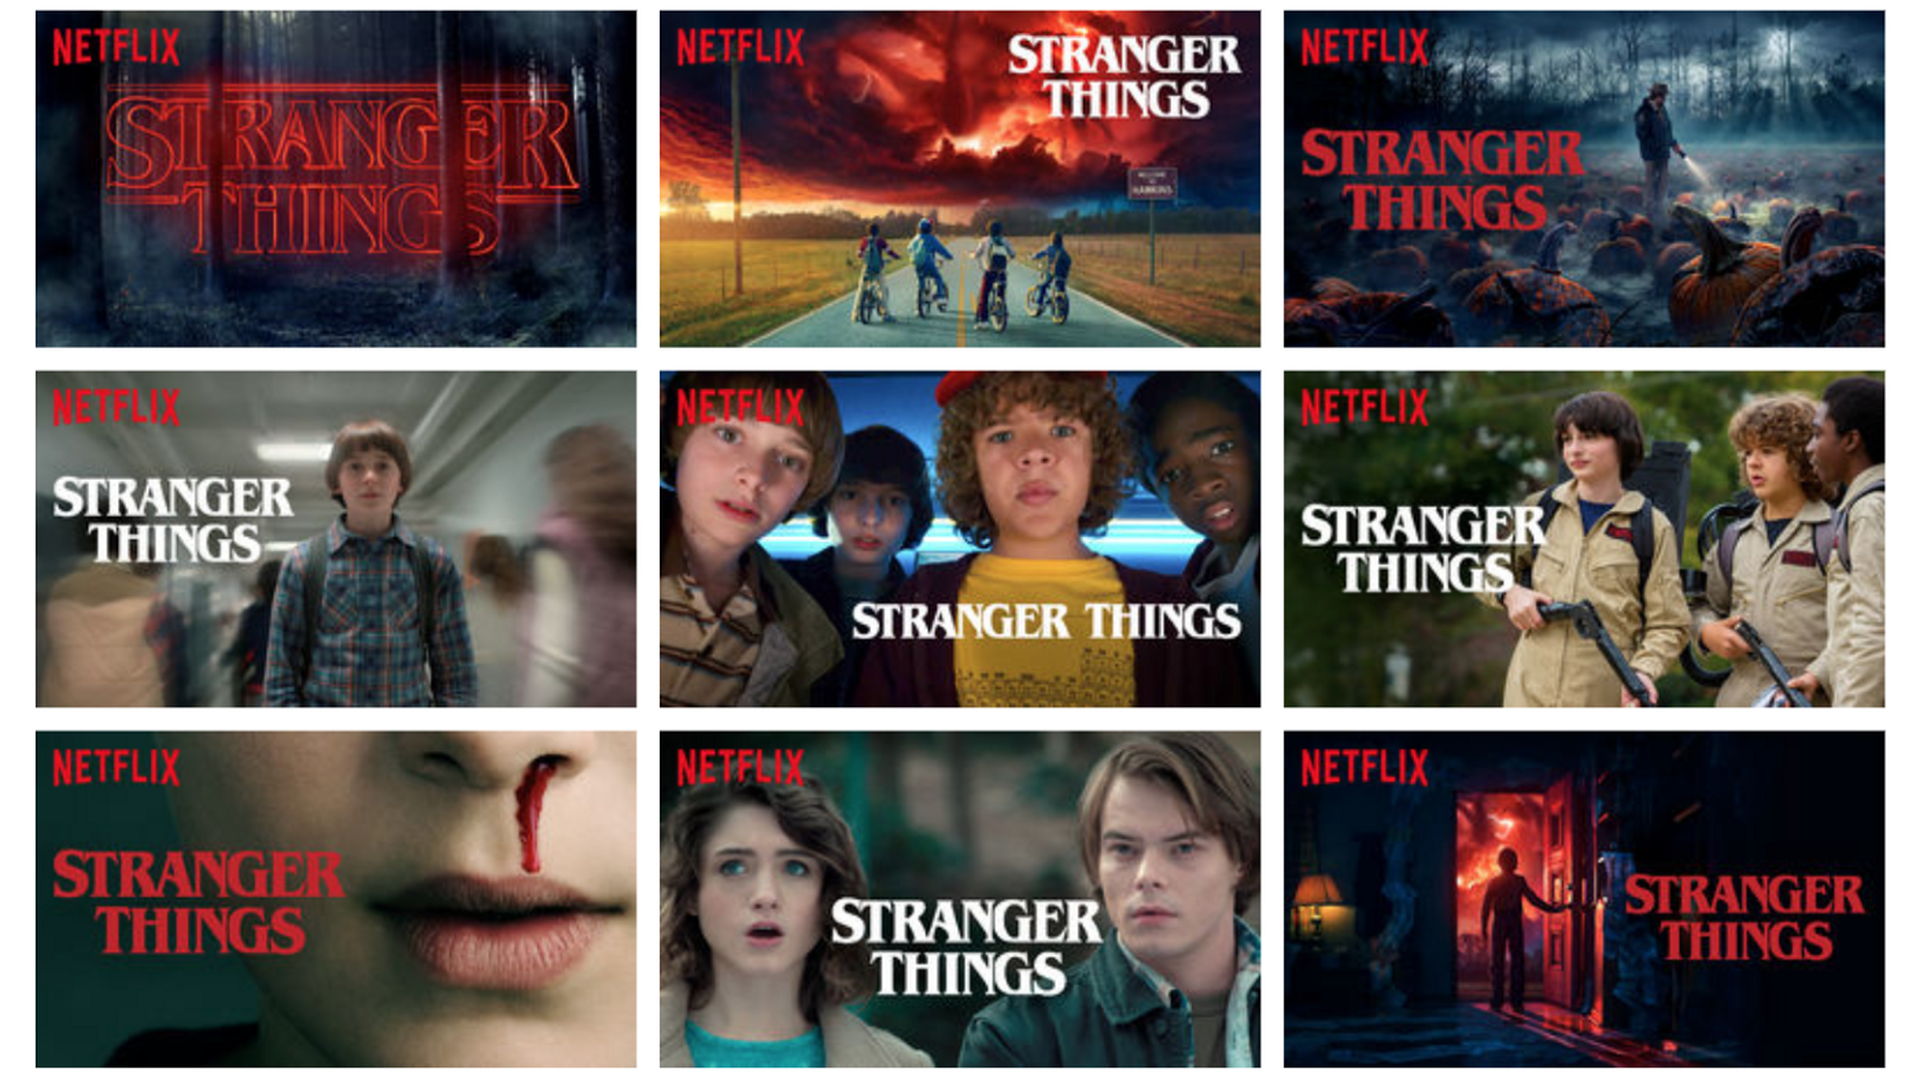 Stranger things compilation. Several pictures of the main characters. 